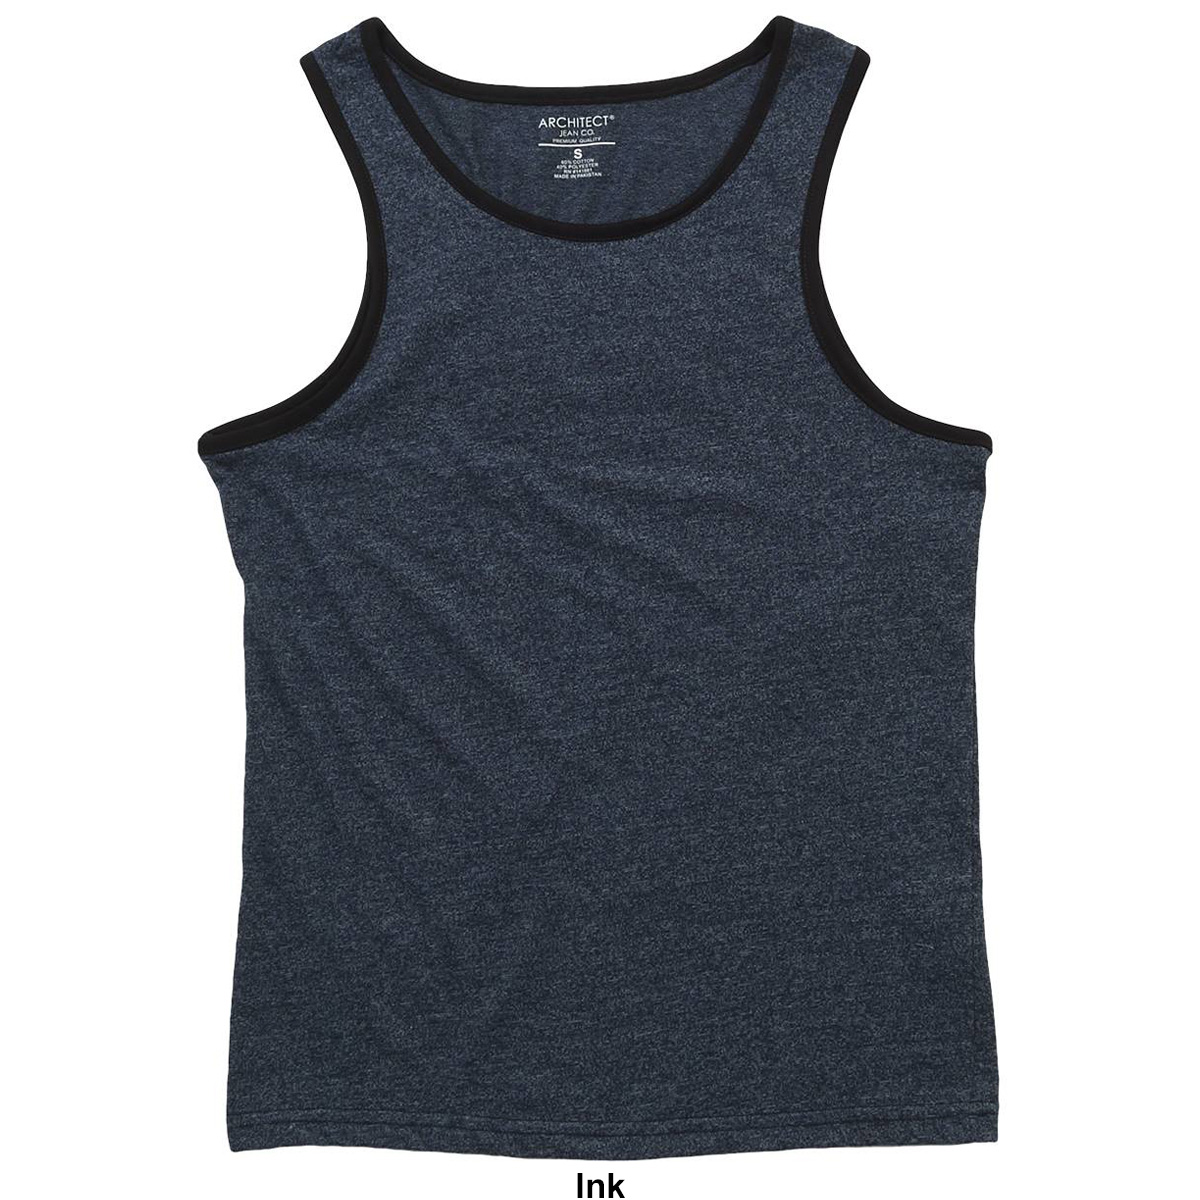 Young Mens Architect(R) Jean Co. Tank Top